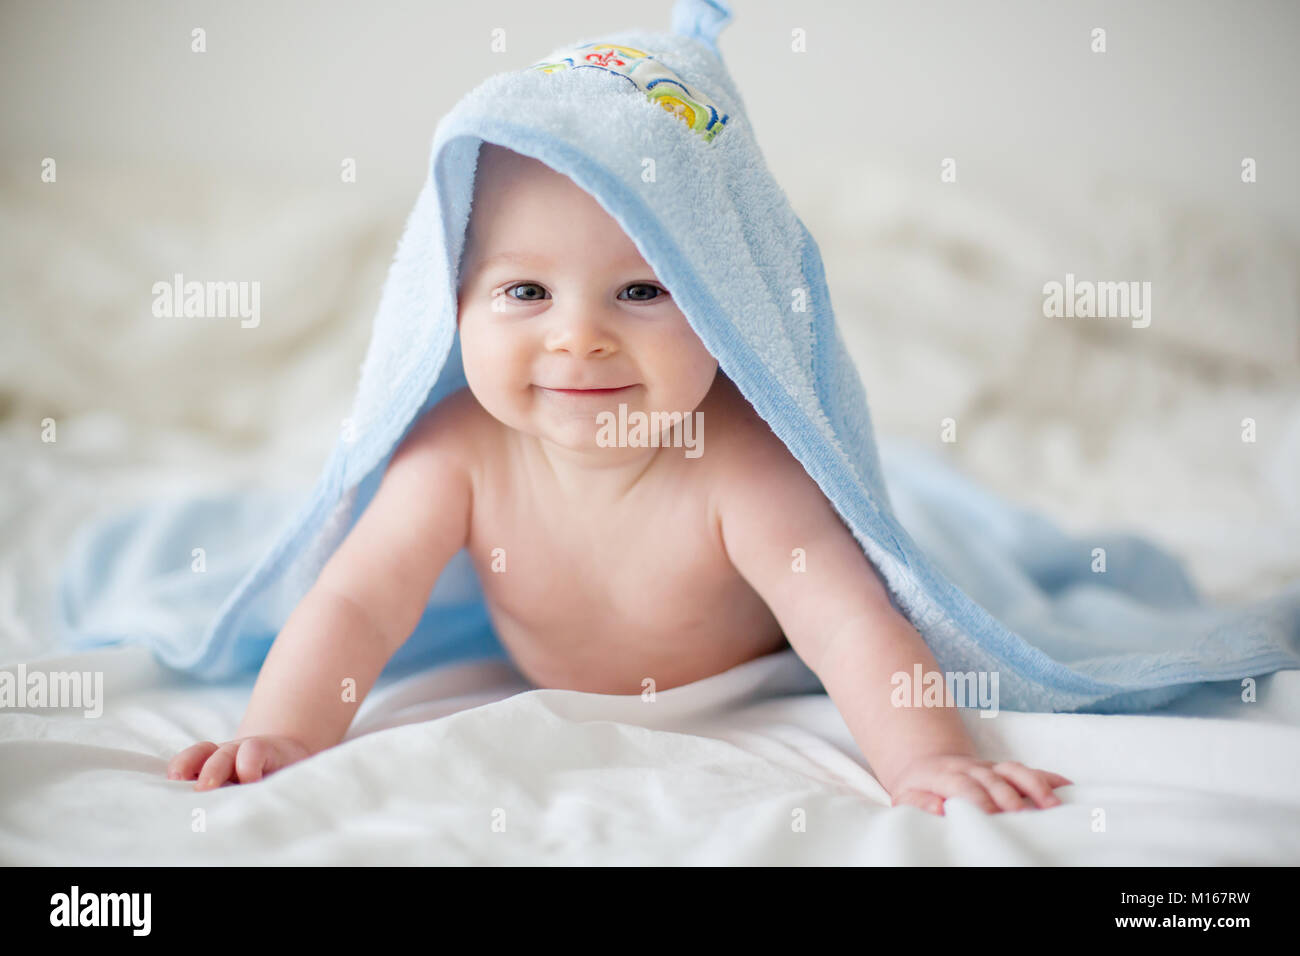 Top 999+ cute little boy images – Amazing Collection cute little boy images Full 4K